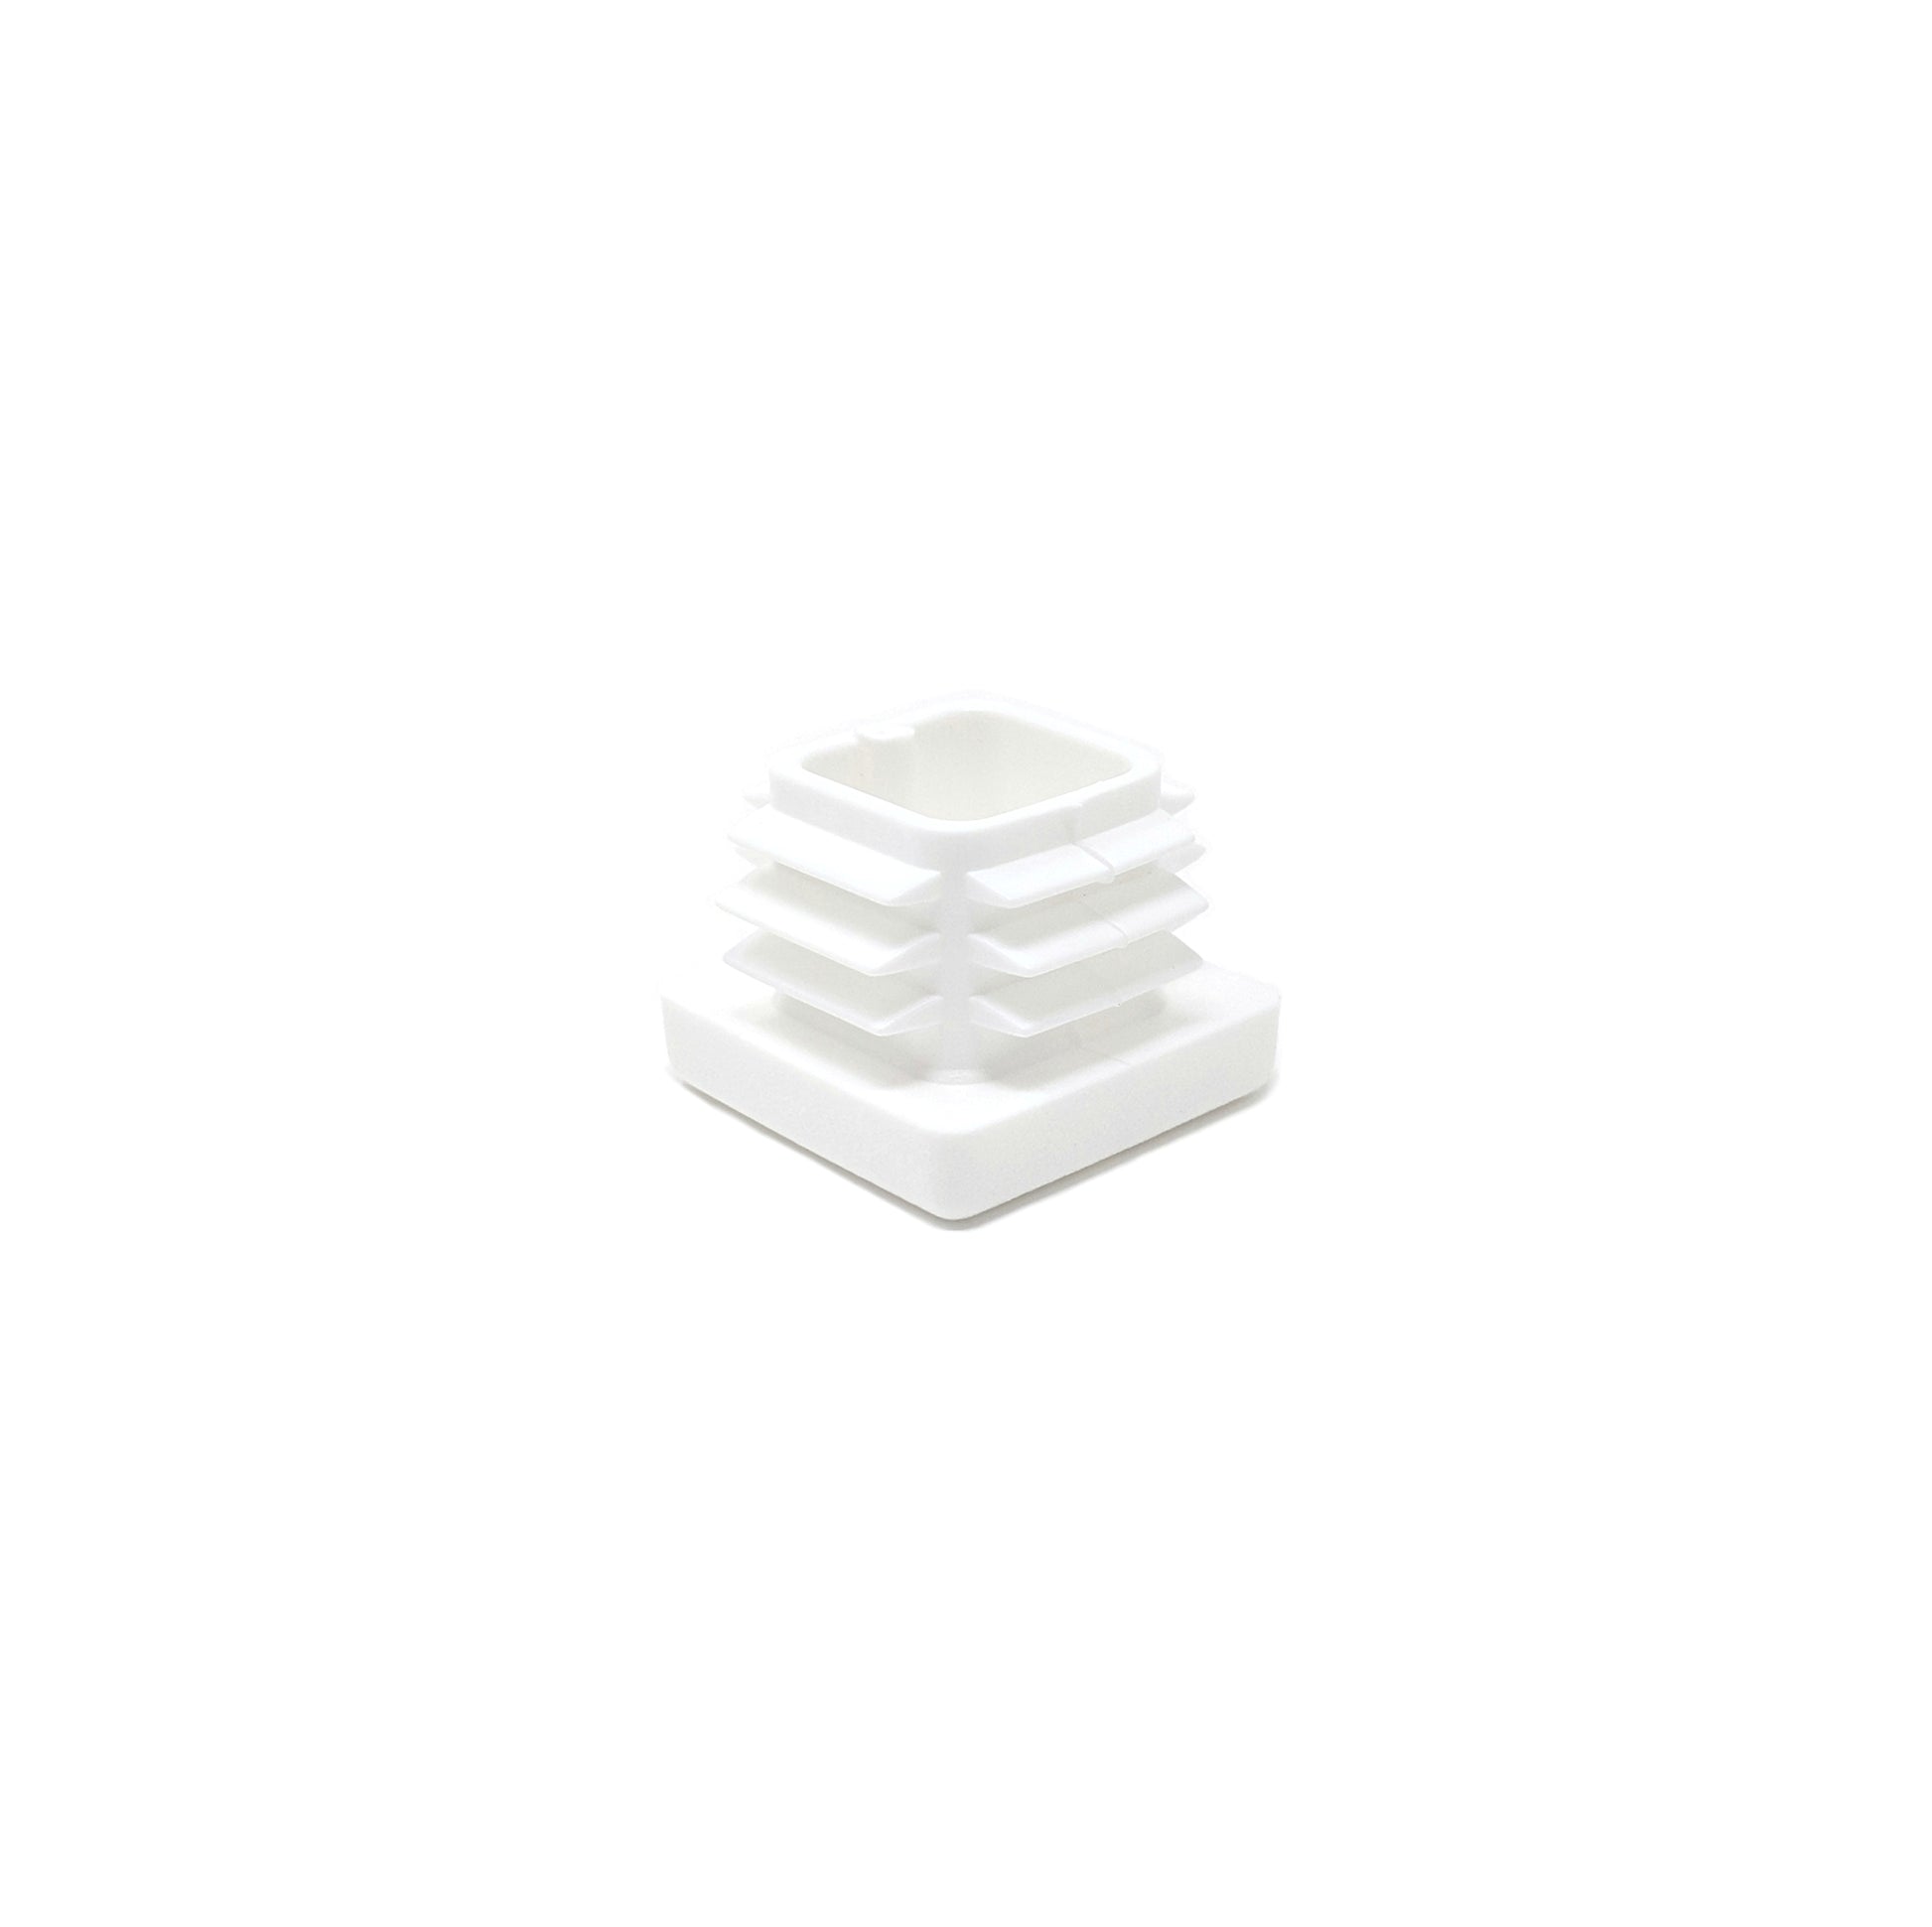 Square Tube Inserts 22mm x 22mm White | Made in Germany | Keay Vital Parts - Keay Vital Parts